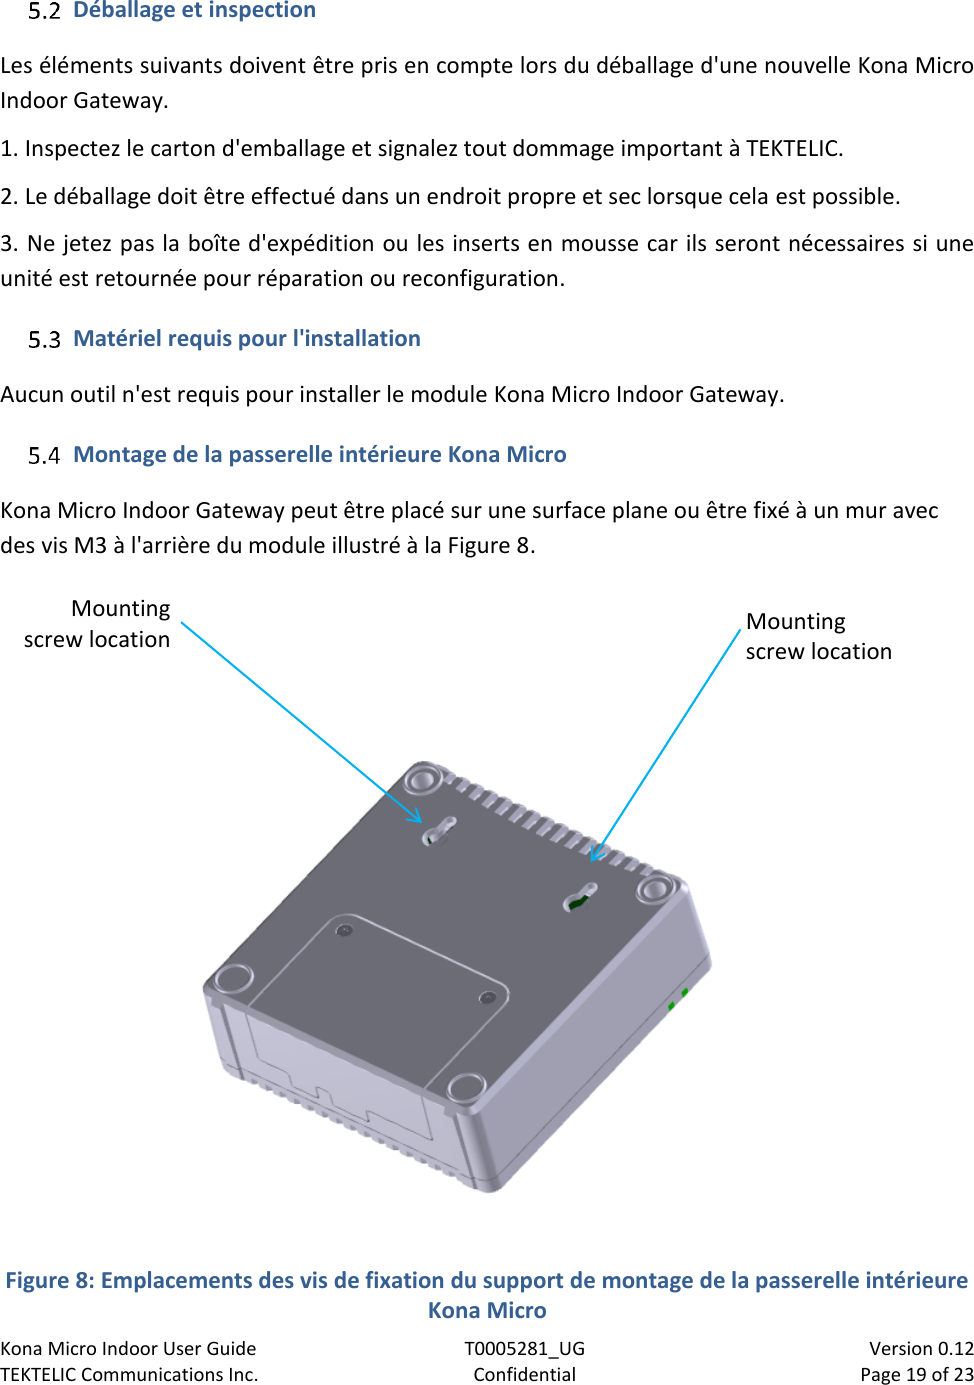 Page 19 of TEKTELIC Communications orporated T0005281 Kona micro outdoor gateway is a LoRa base station User Manual 2150 RRH SDS